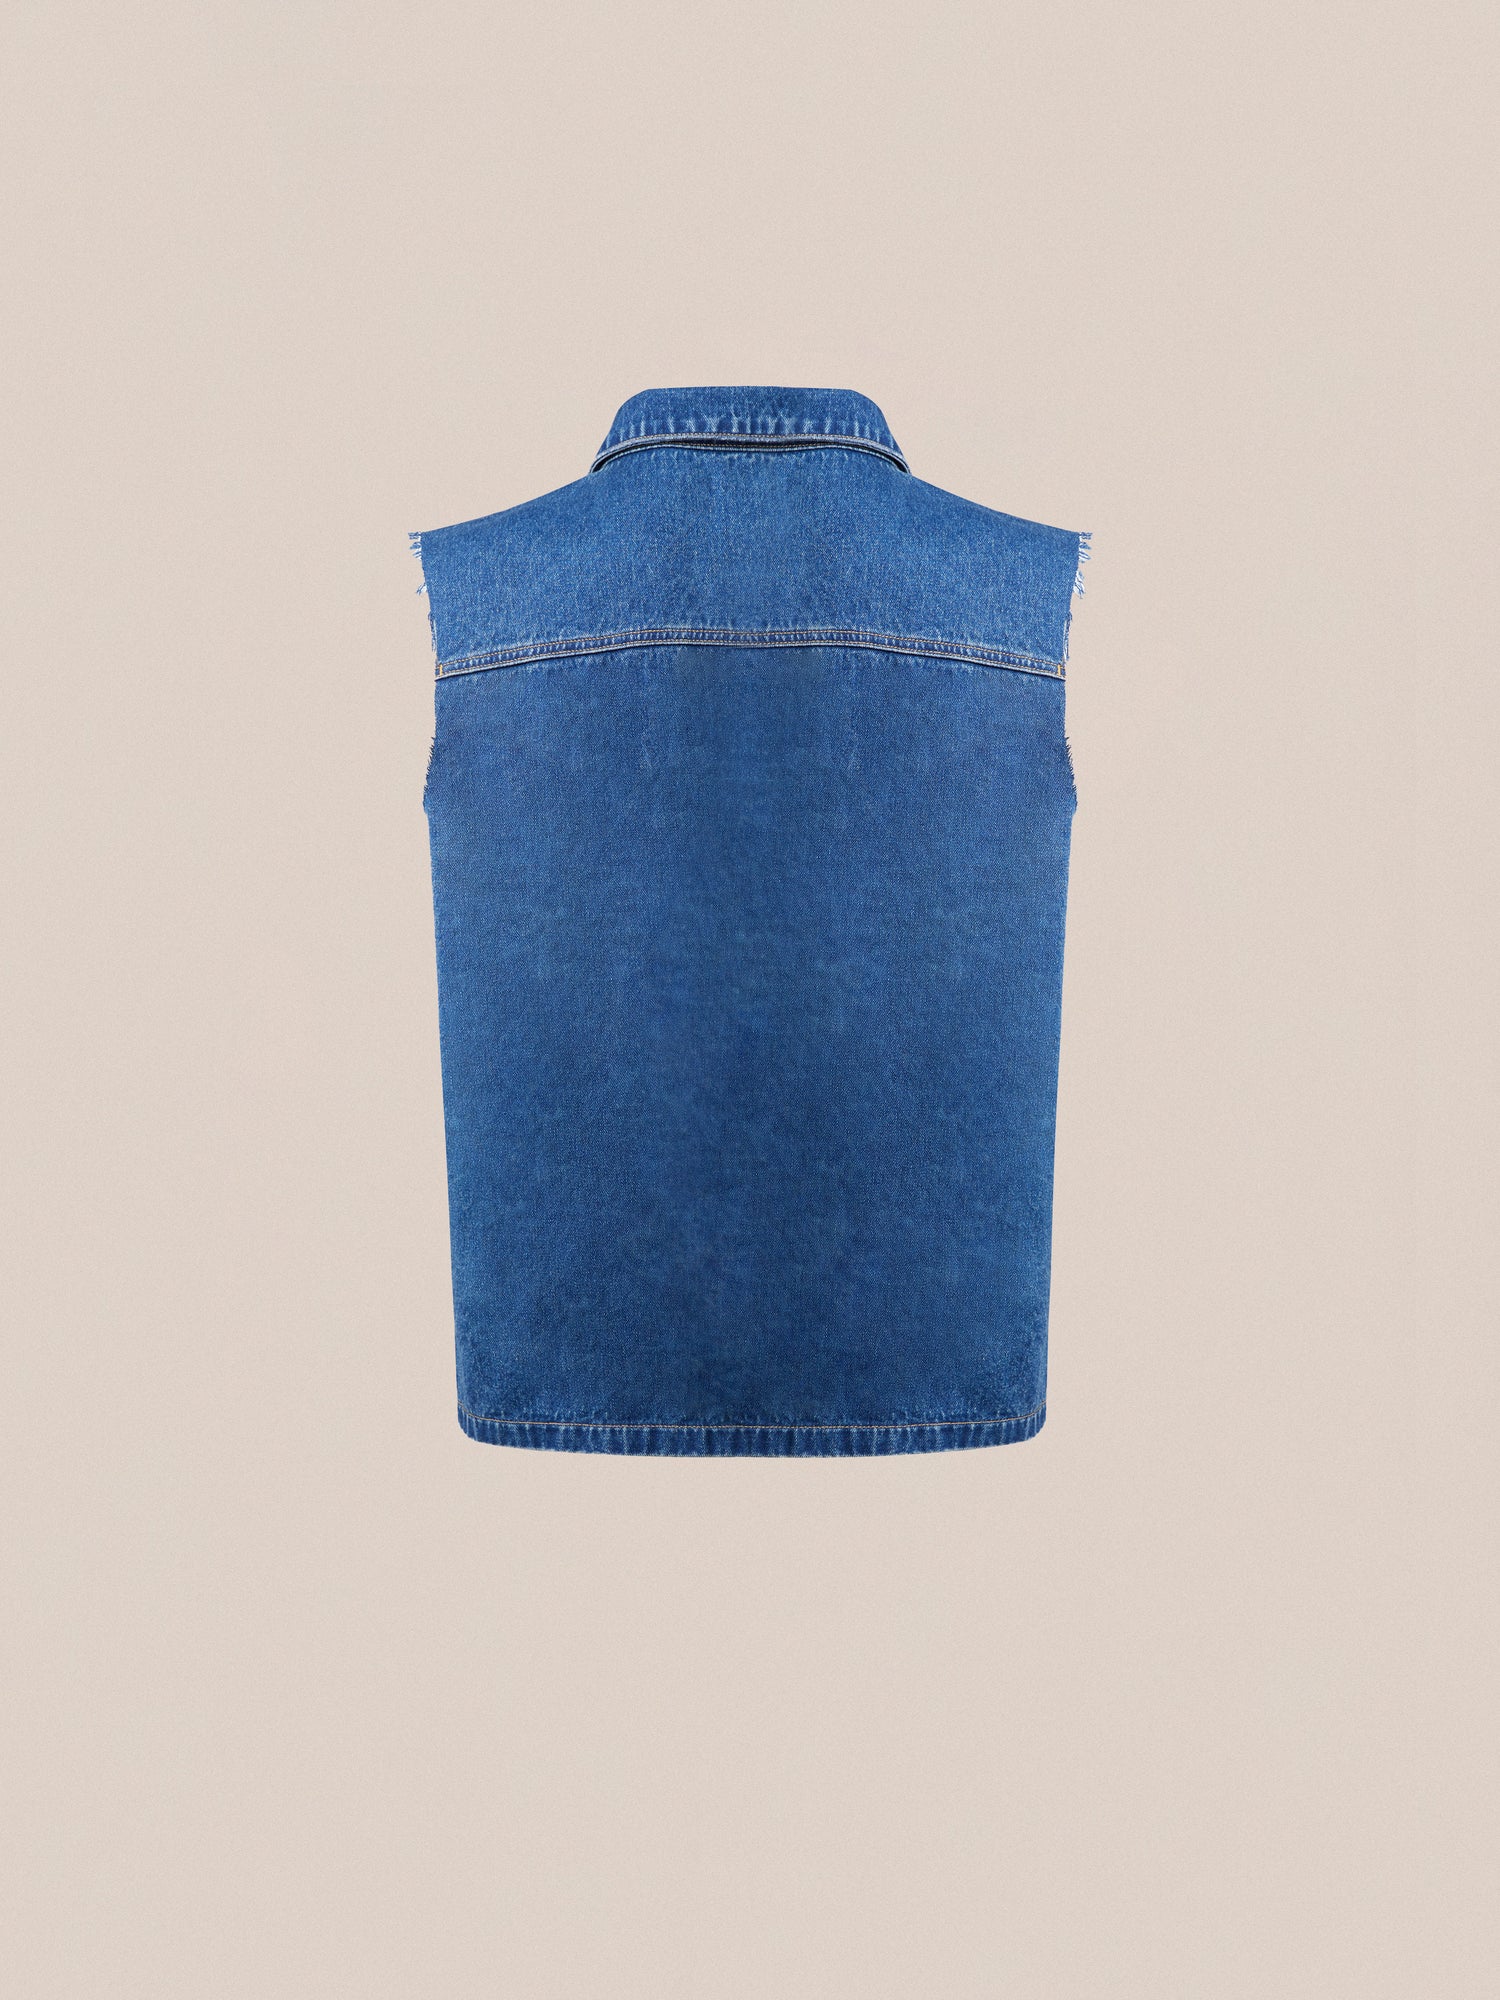 A vintage-inspired, sleeveless Raw Cut Patch Mechanic Denim Vest by Found displayed against a plain beige background.